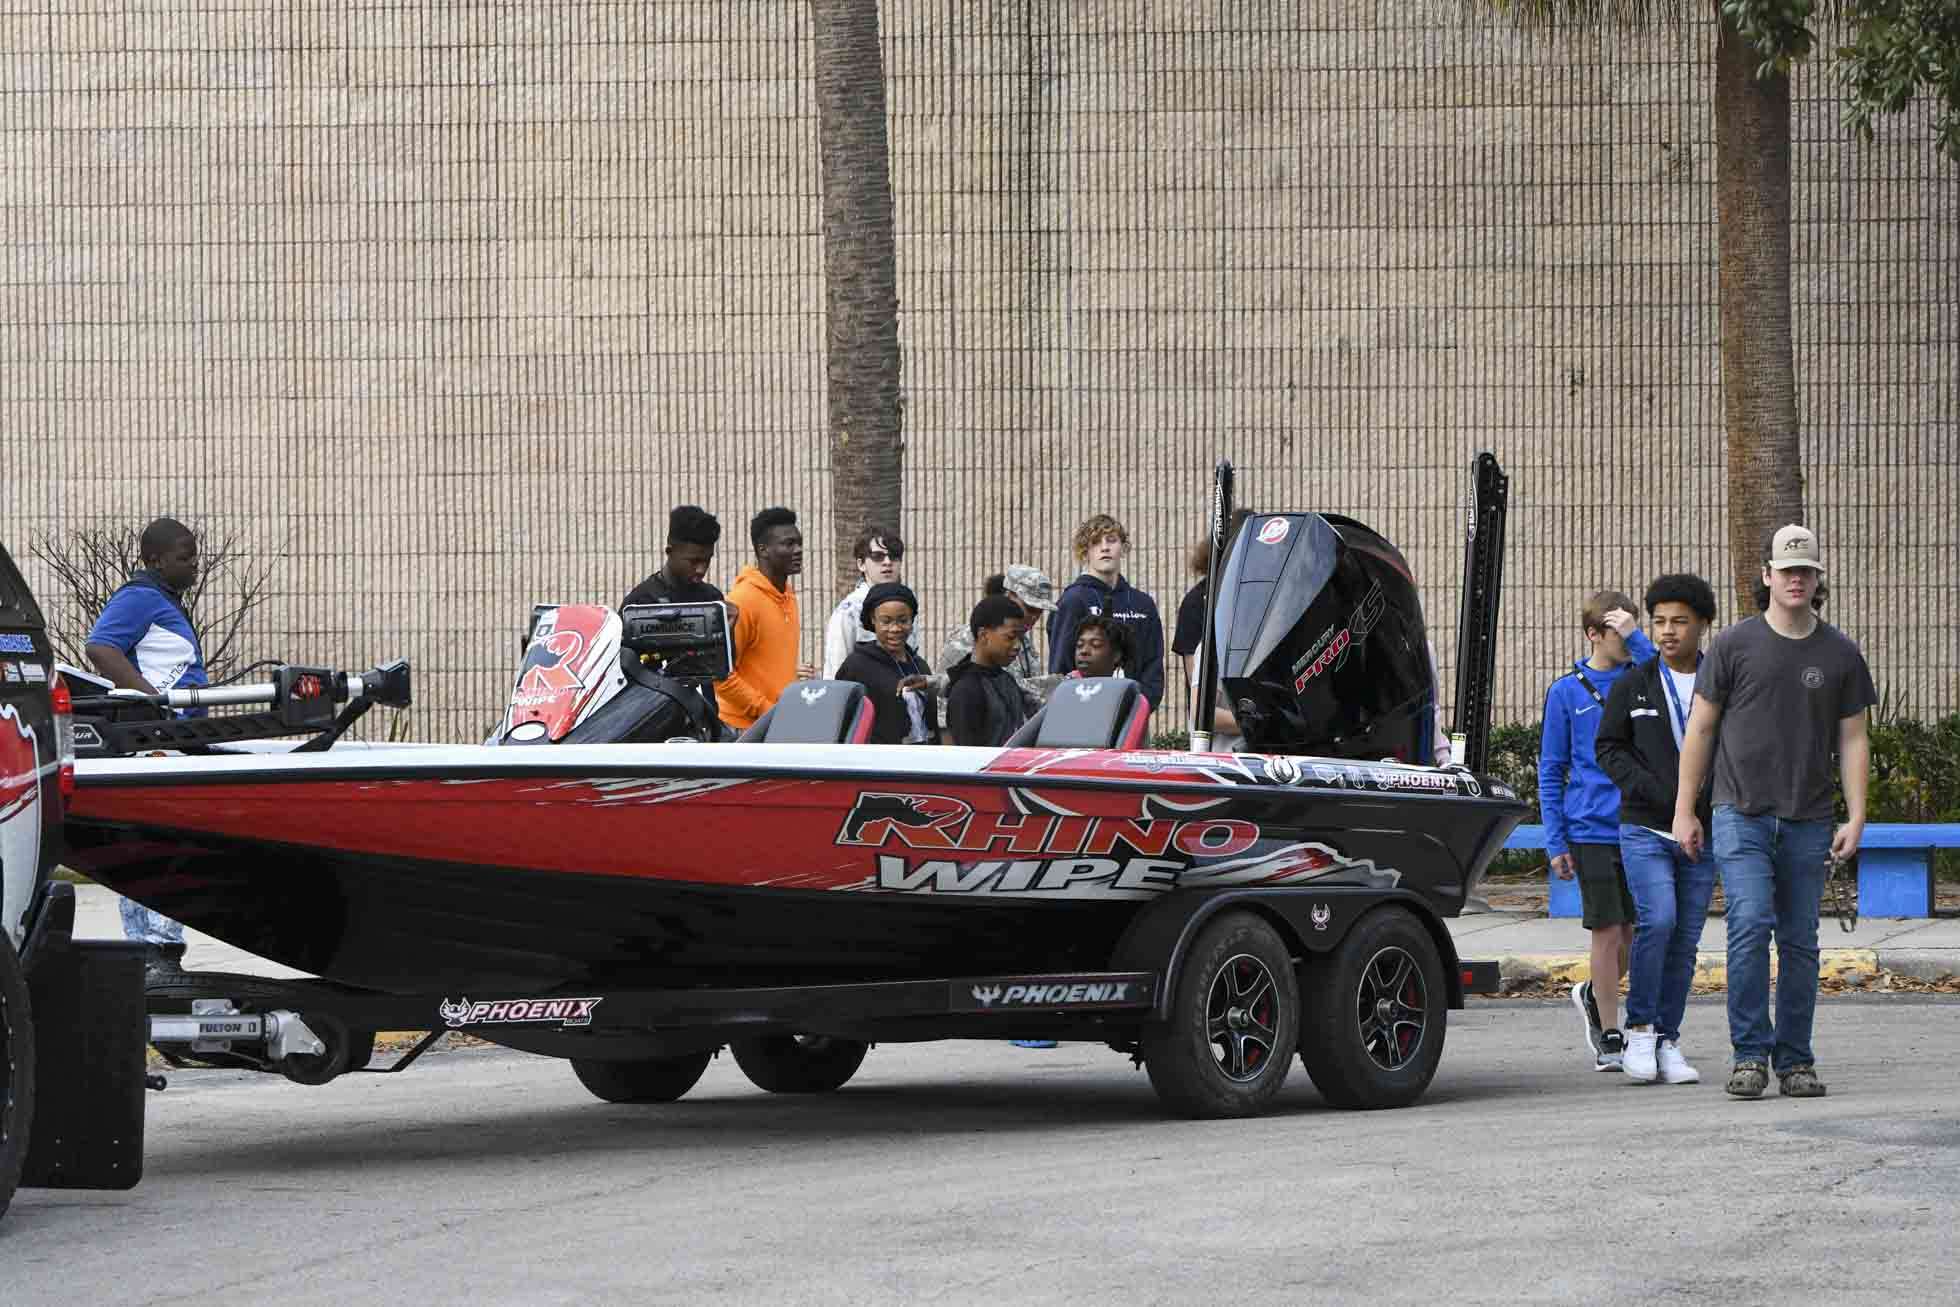 Groups of students headed straight for the anglers to ask questions, take photos and learn more about the business of professional bass fishing.